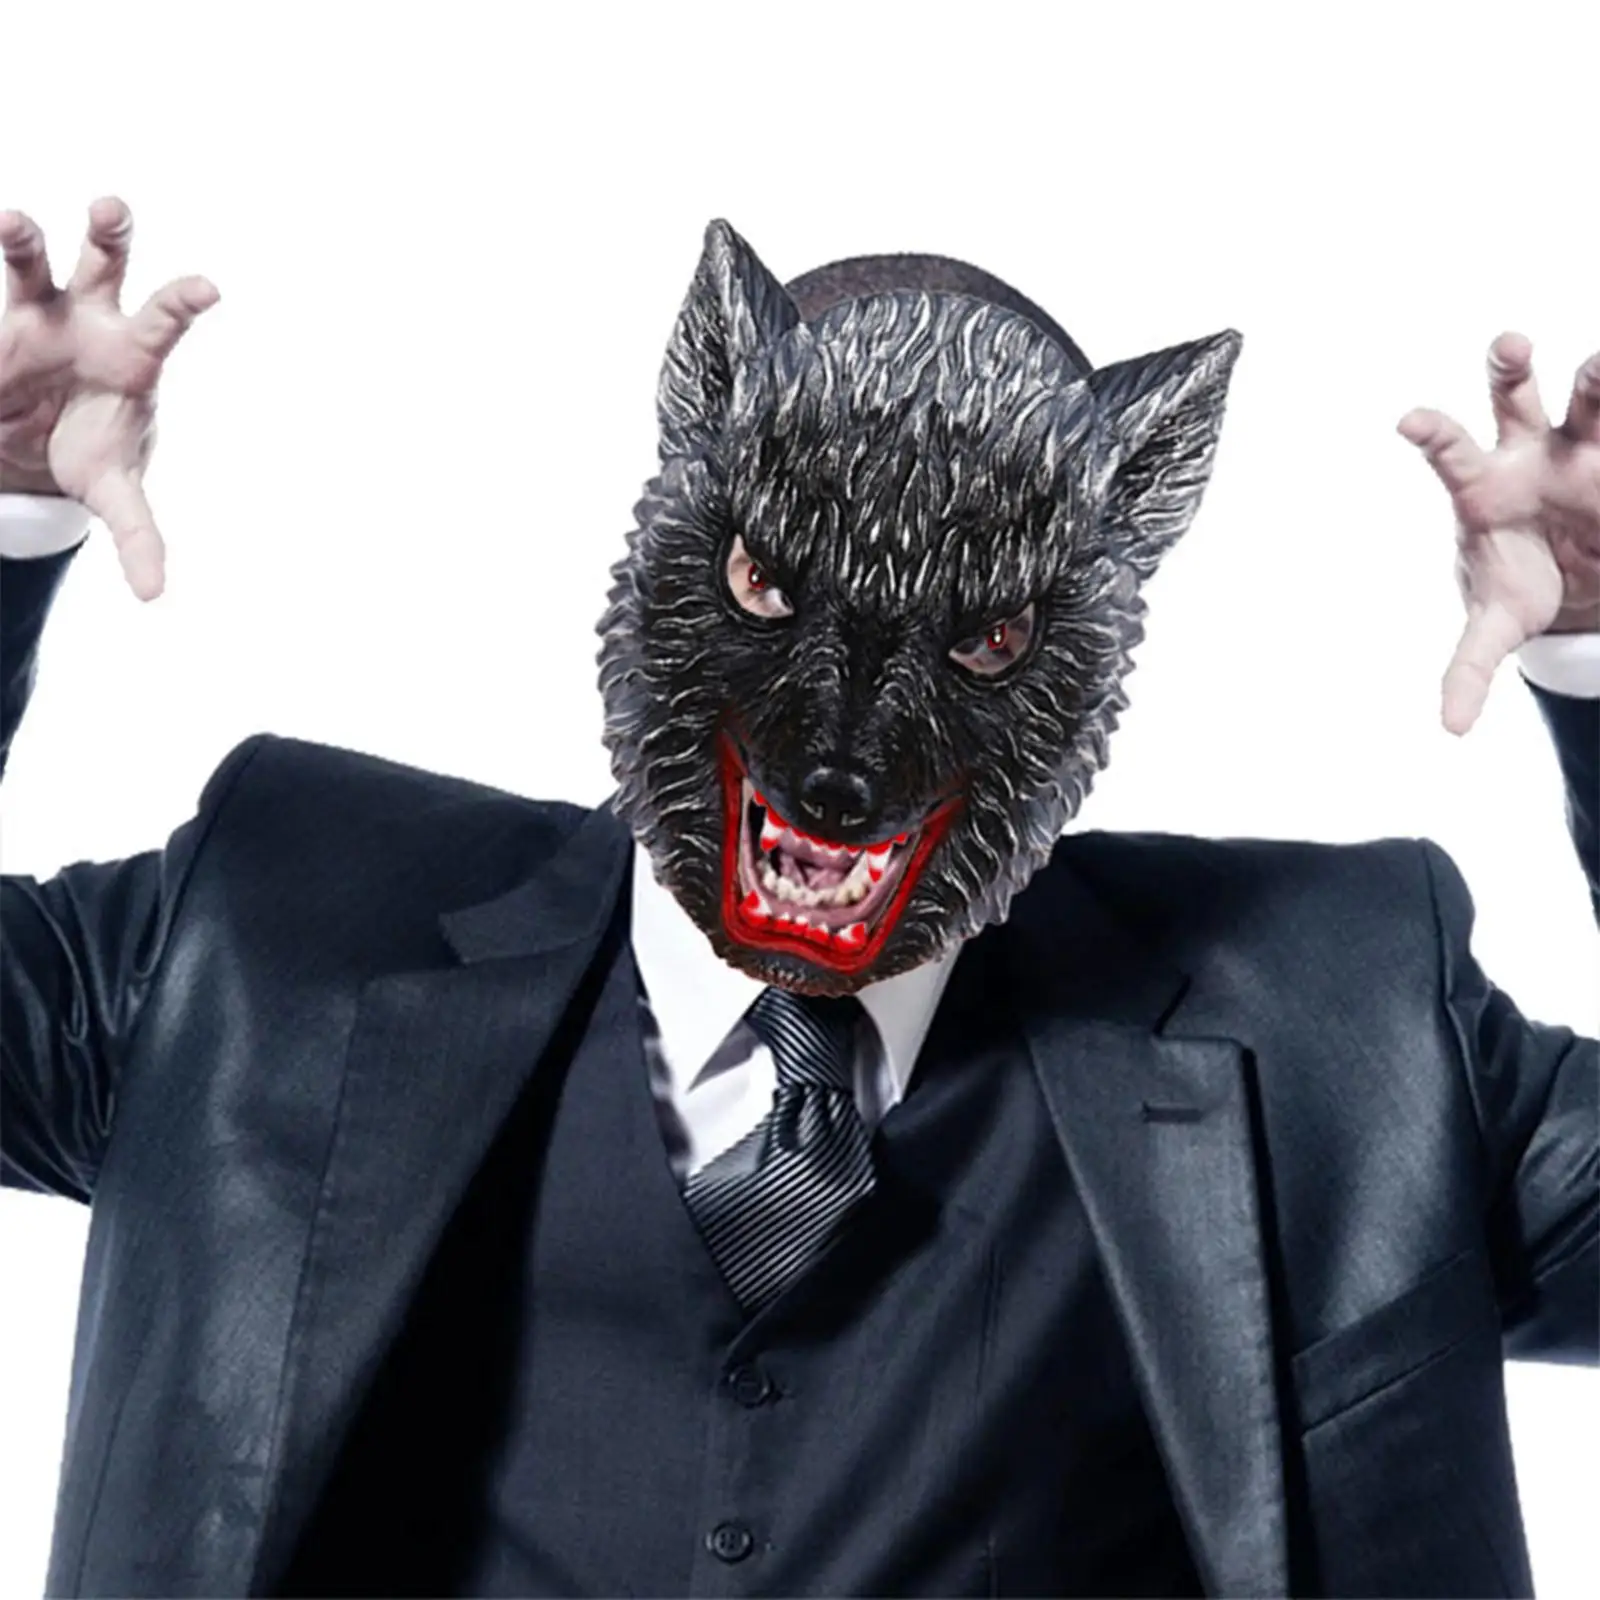 Halloween Wolf Mask Masquerade Cosplay Costume Accessories Party Supplies Werewolf Half Face for Theatrical Stage Photo Props